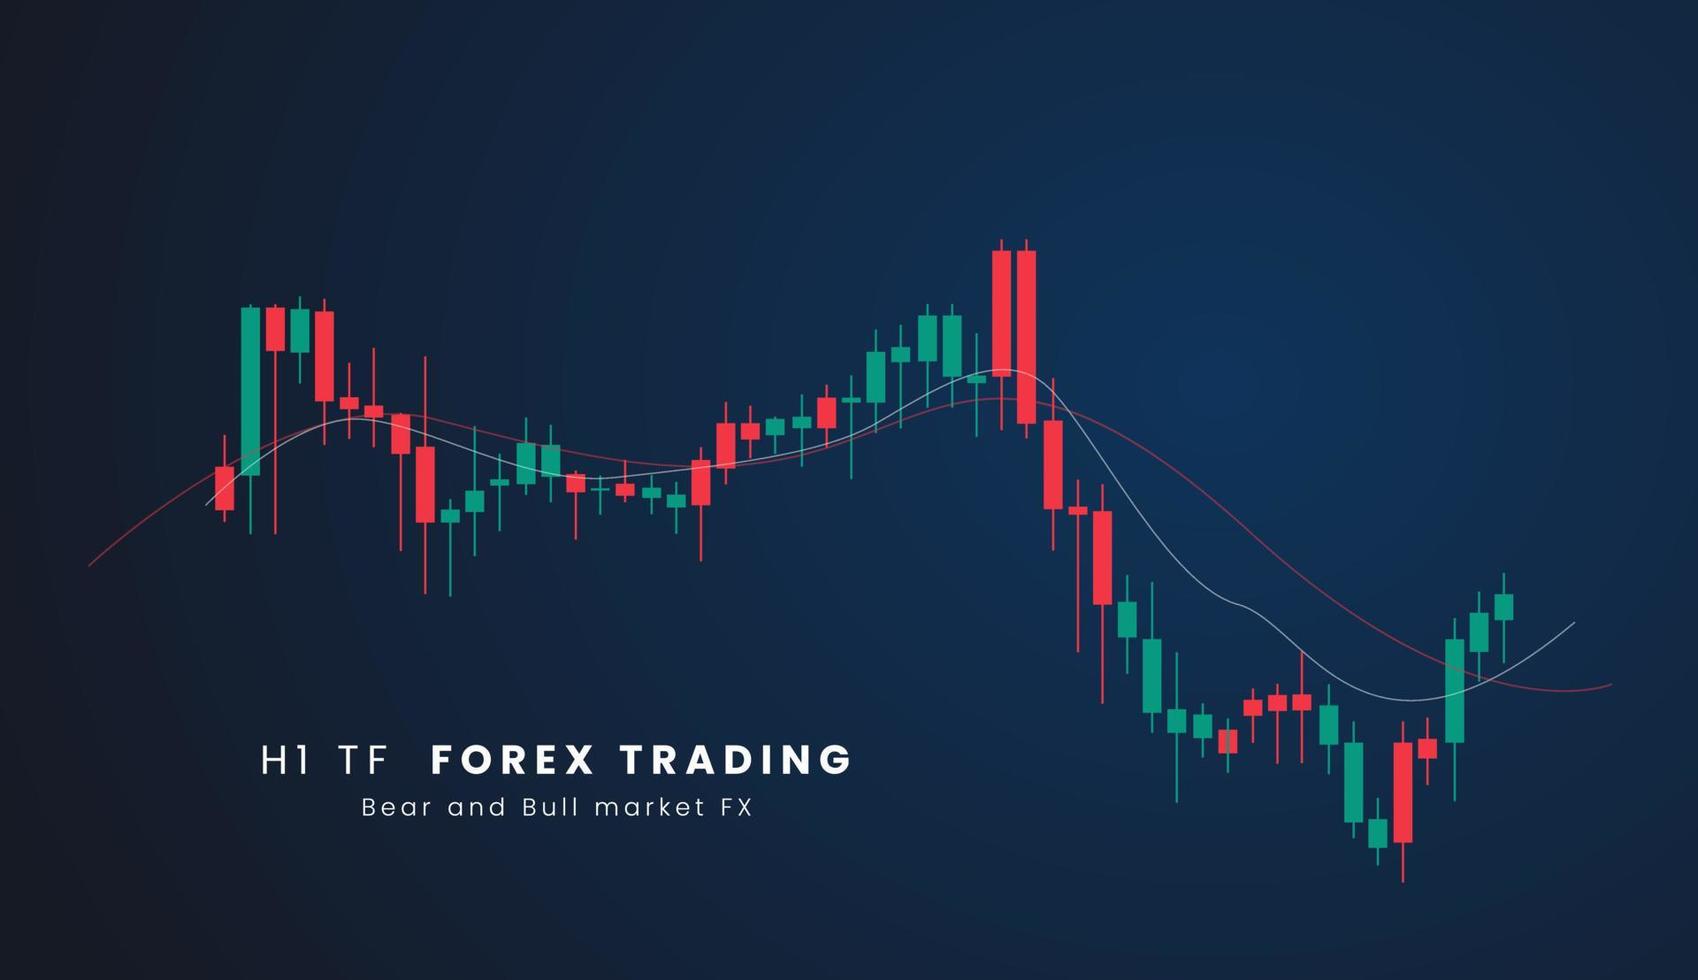 H1 TF Stock market or forex trading candlestick graph in graphic design for financial investment concept vector